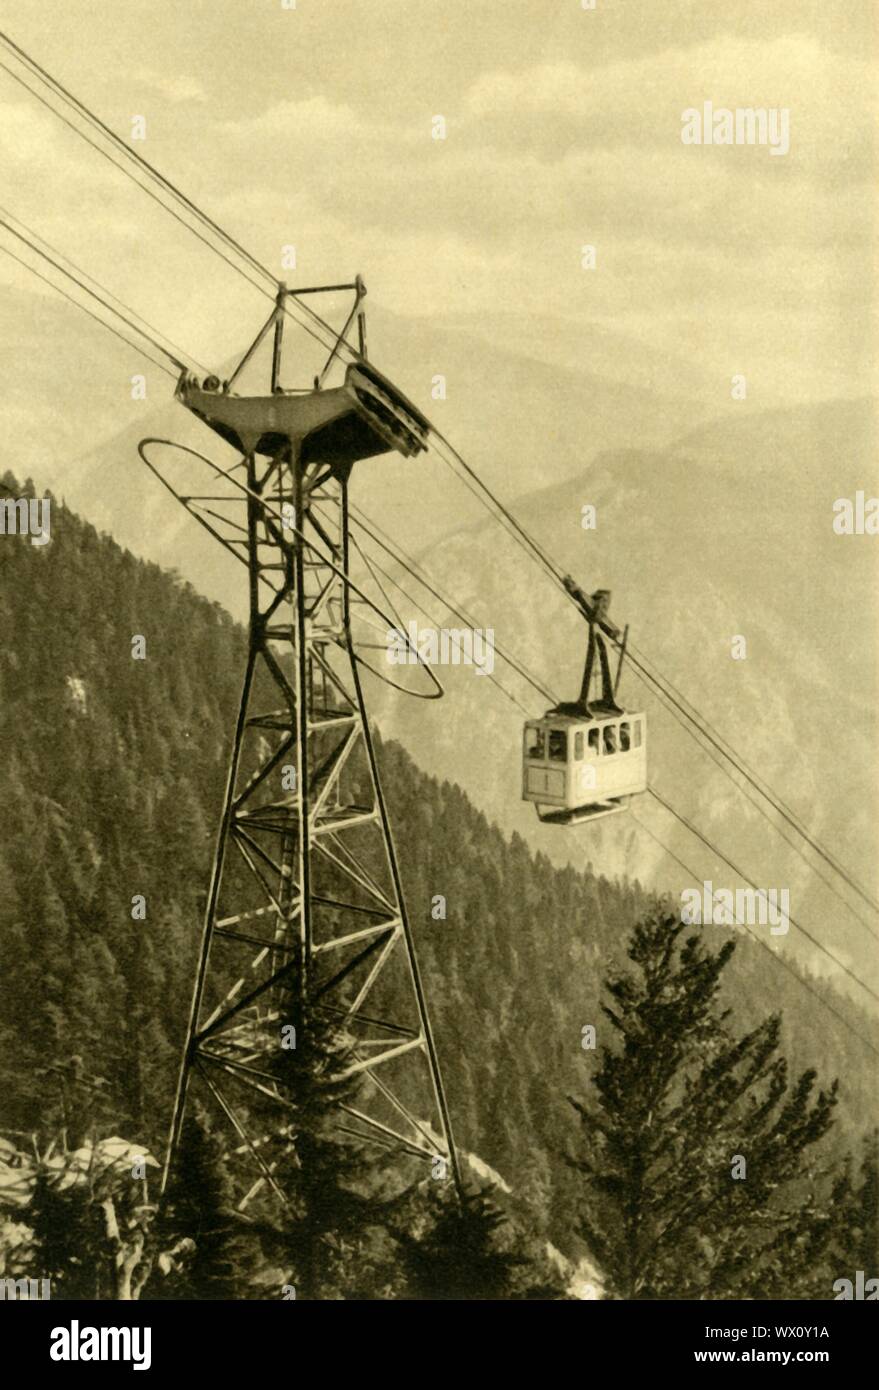 Cable car, Rax Mountains, Lower Austria, c1935. The Raxseilbahn, the first aerial tramway in Austria, opened in 1926. From &quot;&#xd6;sterreich - Land Und Volk&quot;, (Austria, Land and People). [R. Lechner (Wilhelm M&#xfc;ller), Vienna, c1935] Stock Photo